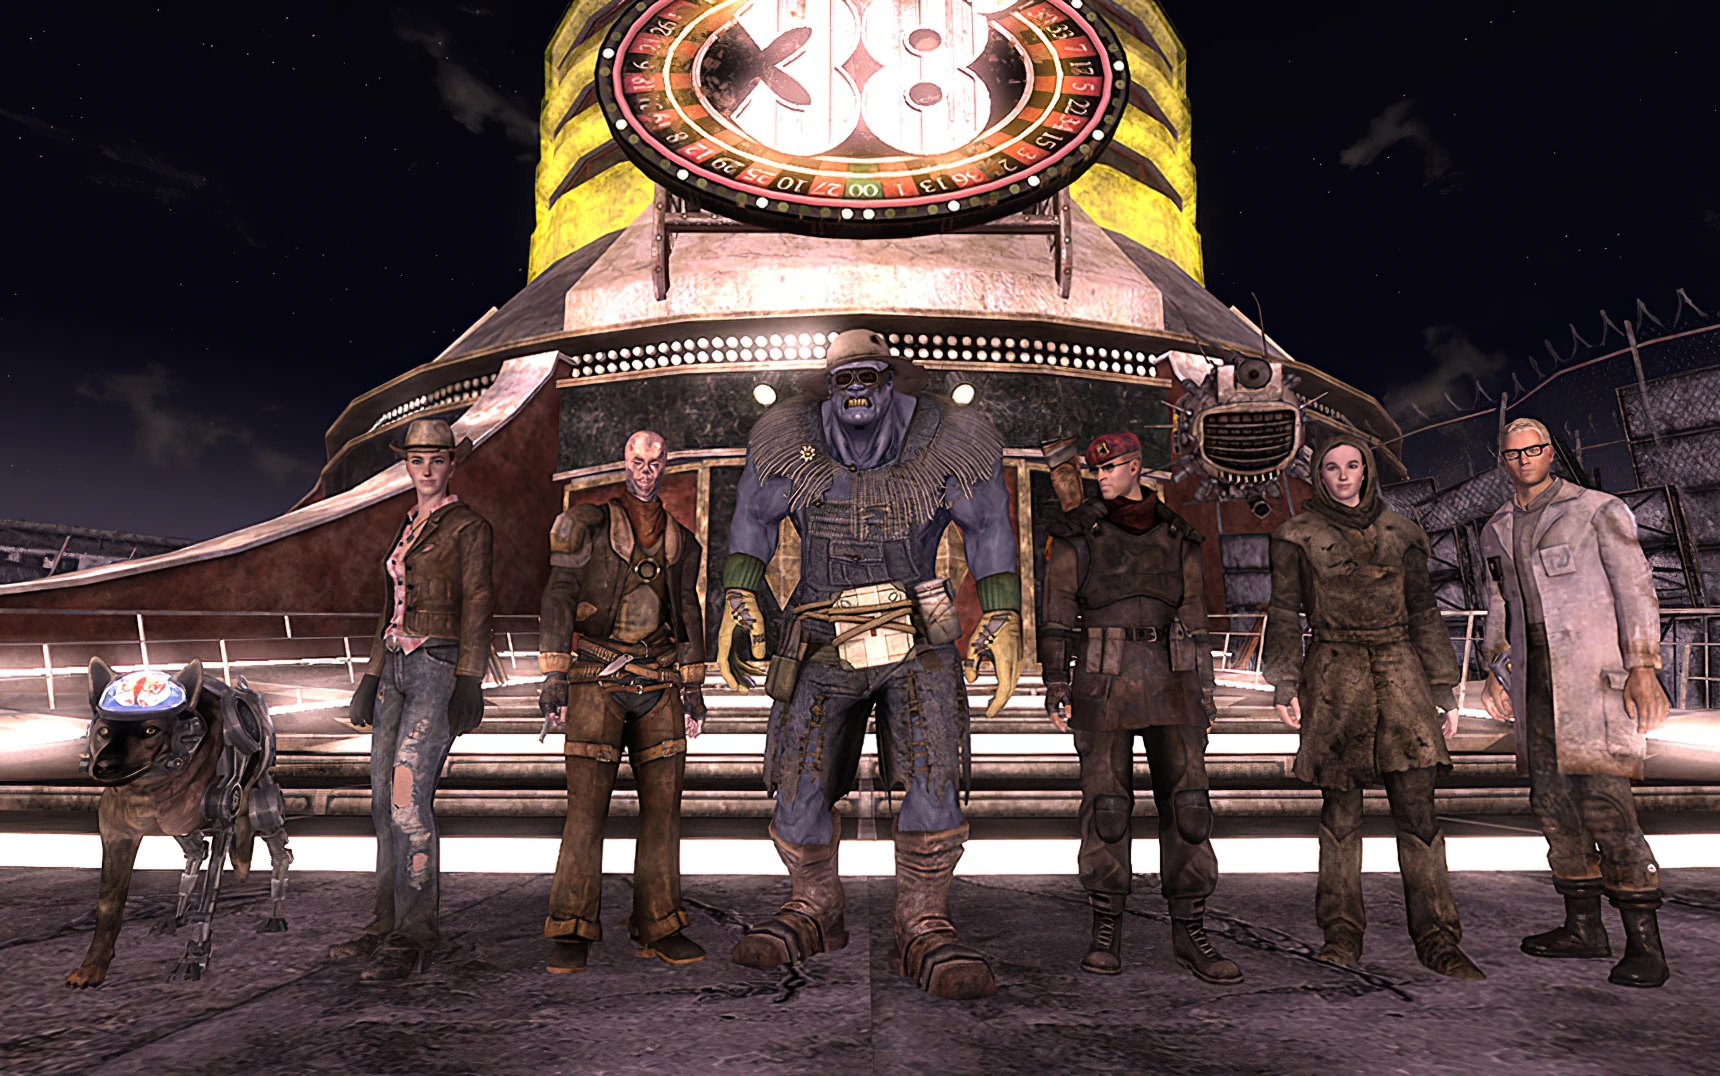 Veronica, Rose, and other New Vegas followers modded into Fallout